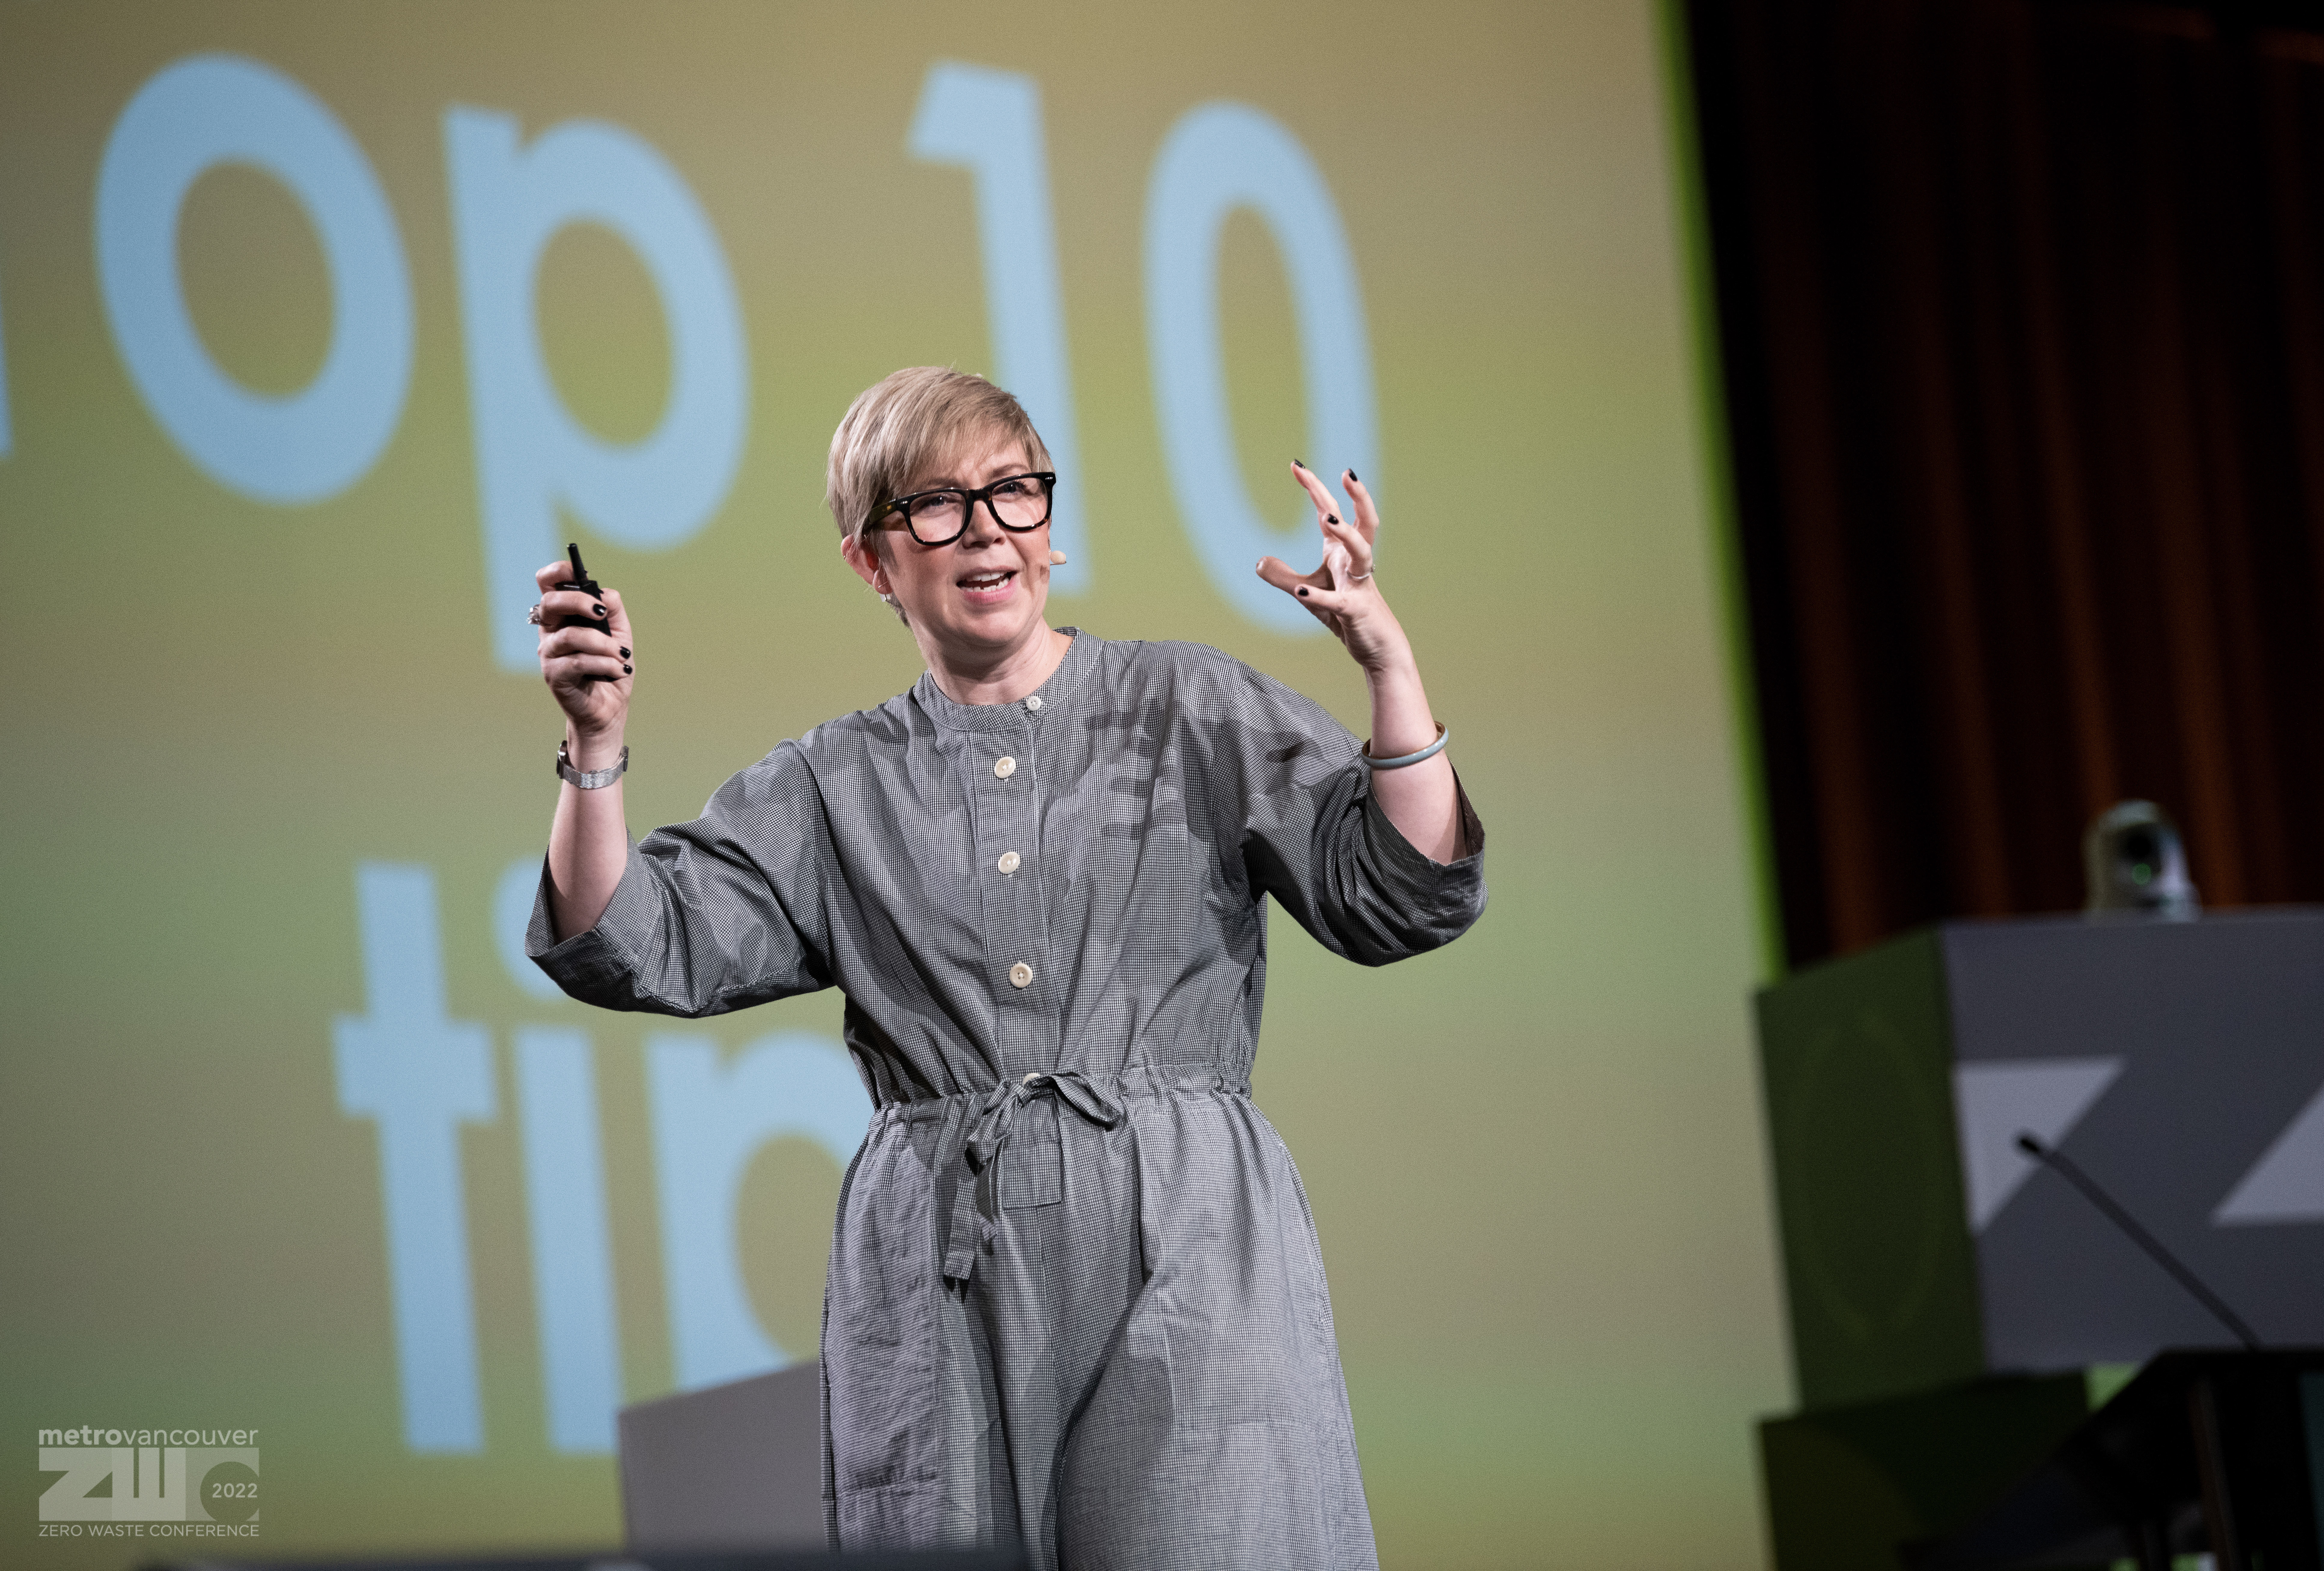 Katie speaking on stage at an international zero waste conference, wearing a grey shirt, jumpsuit, back glasses and hand expressions